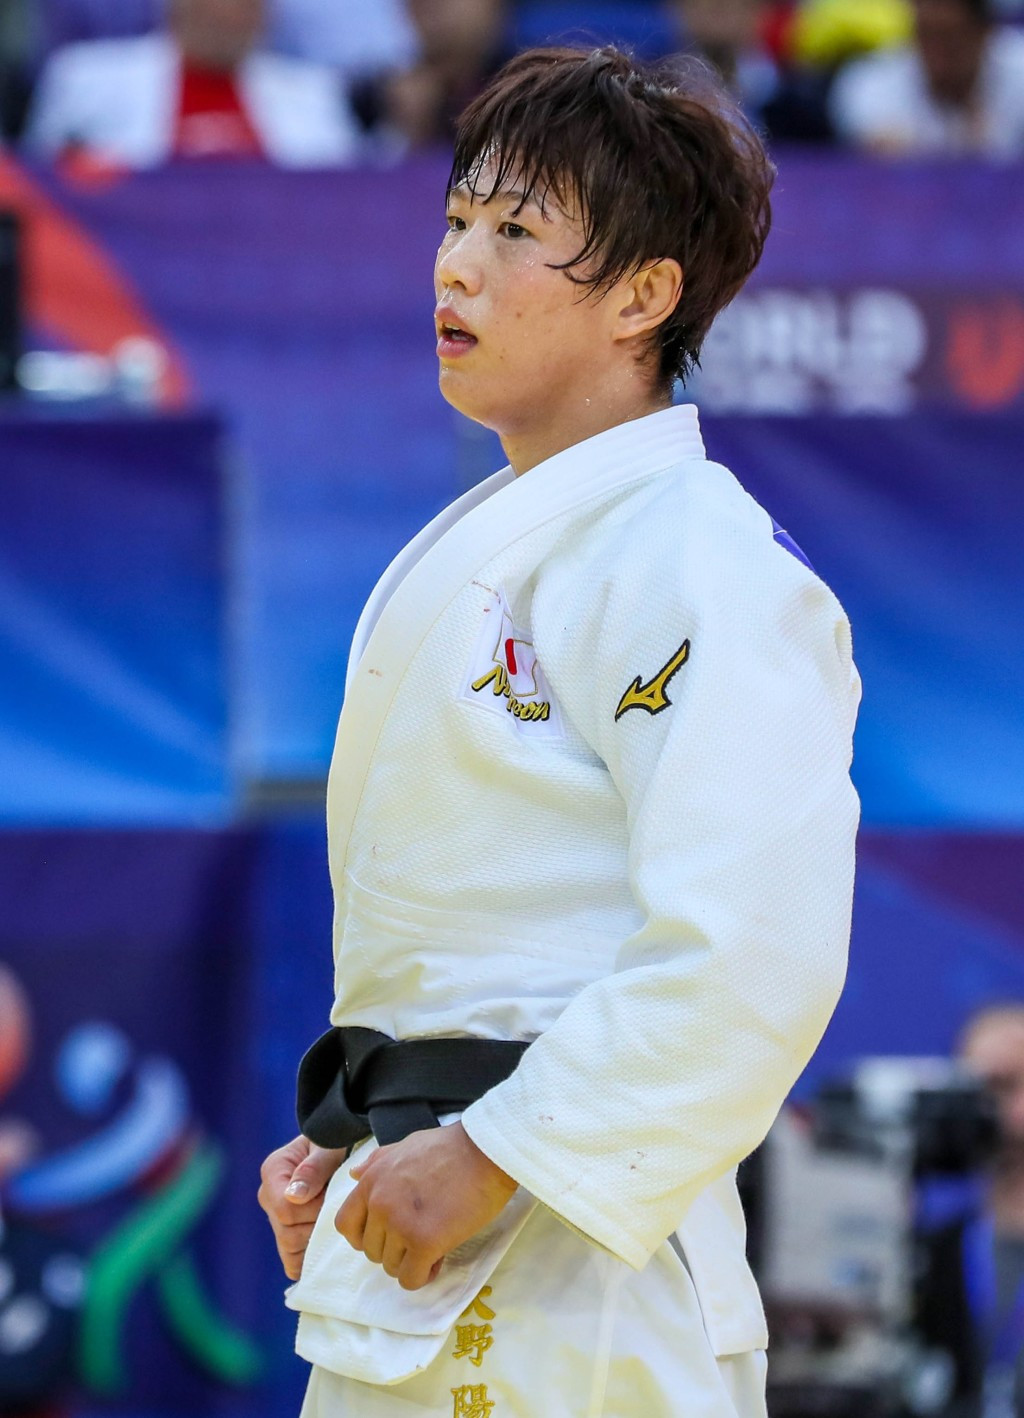 She was joined on the third step of the podium by Yoko Ono, who made sure that Japan would provide half of the medallists in the weight category ©IJF